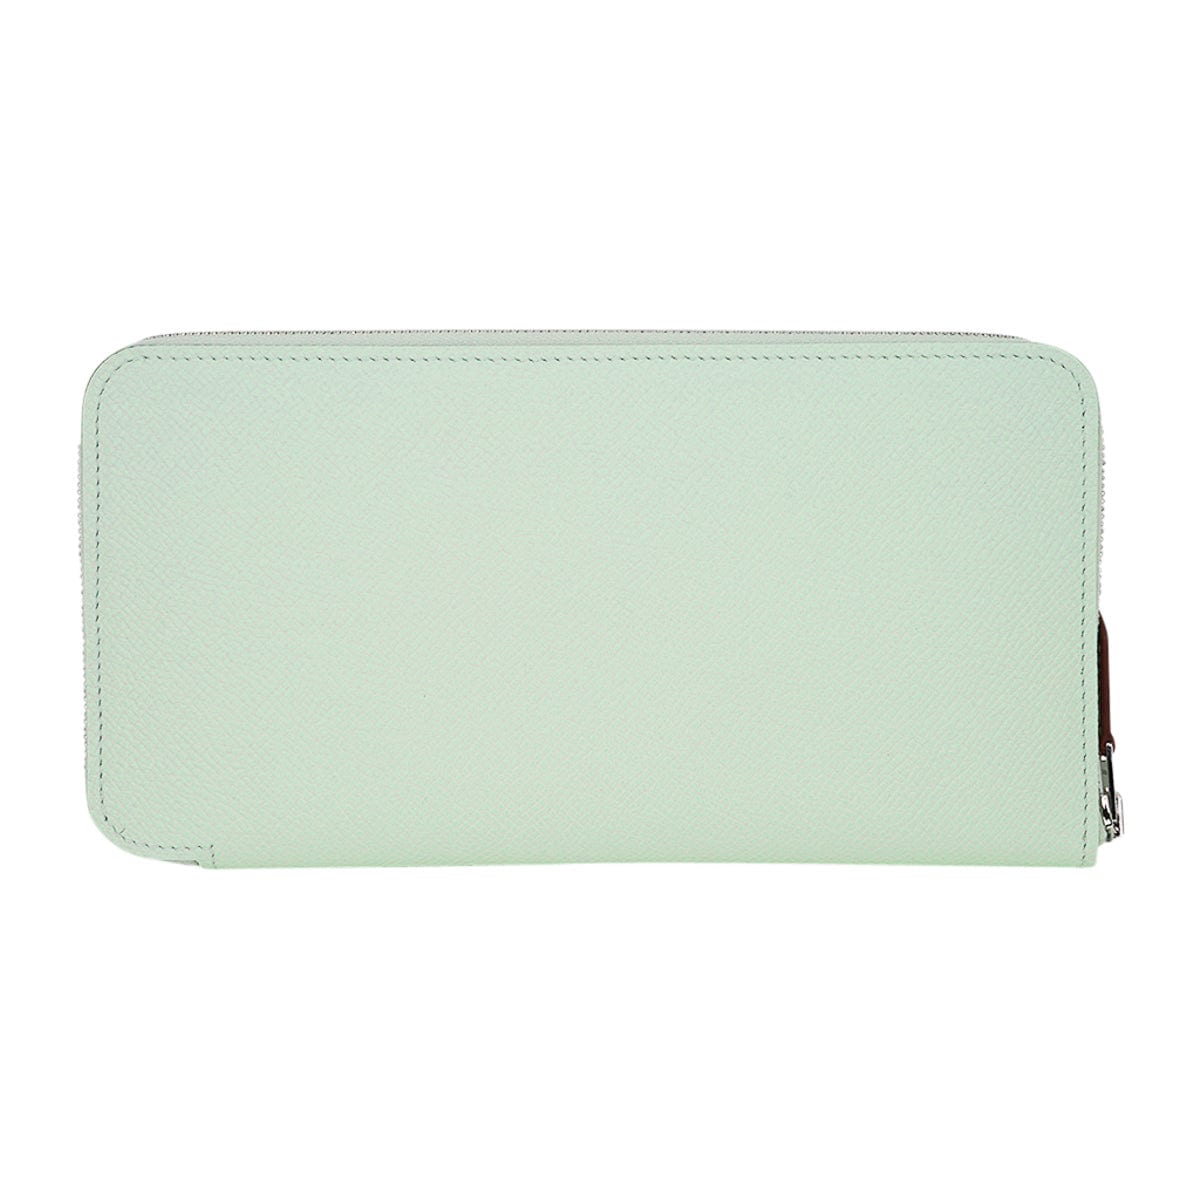 Authentic Hermes White Epsom Leather Azap Silk'in Classic Wallet